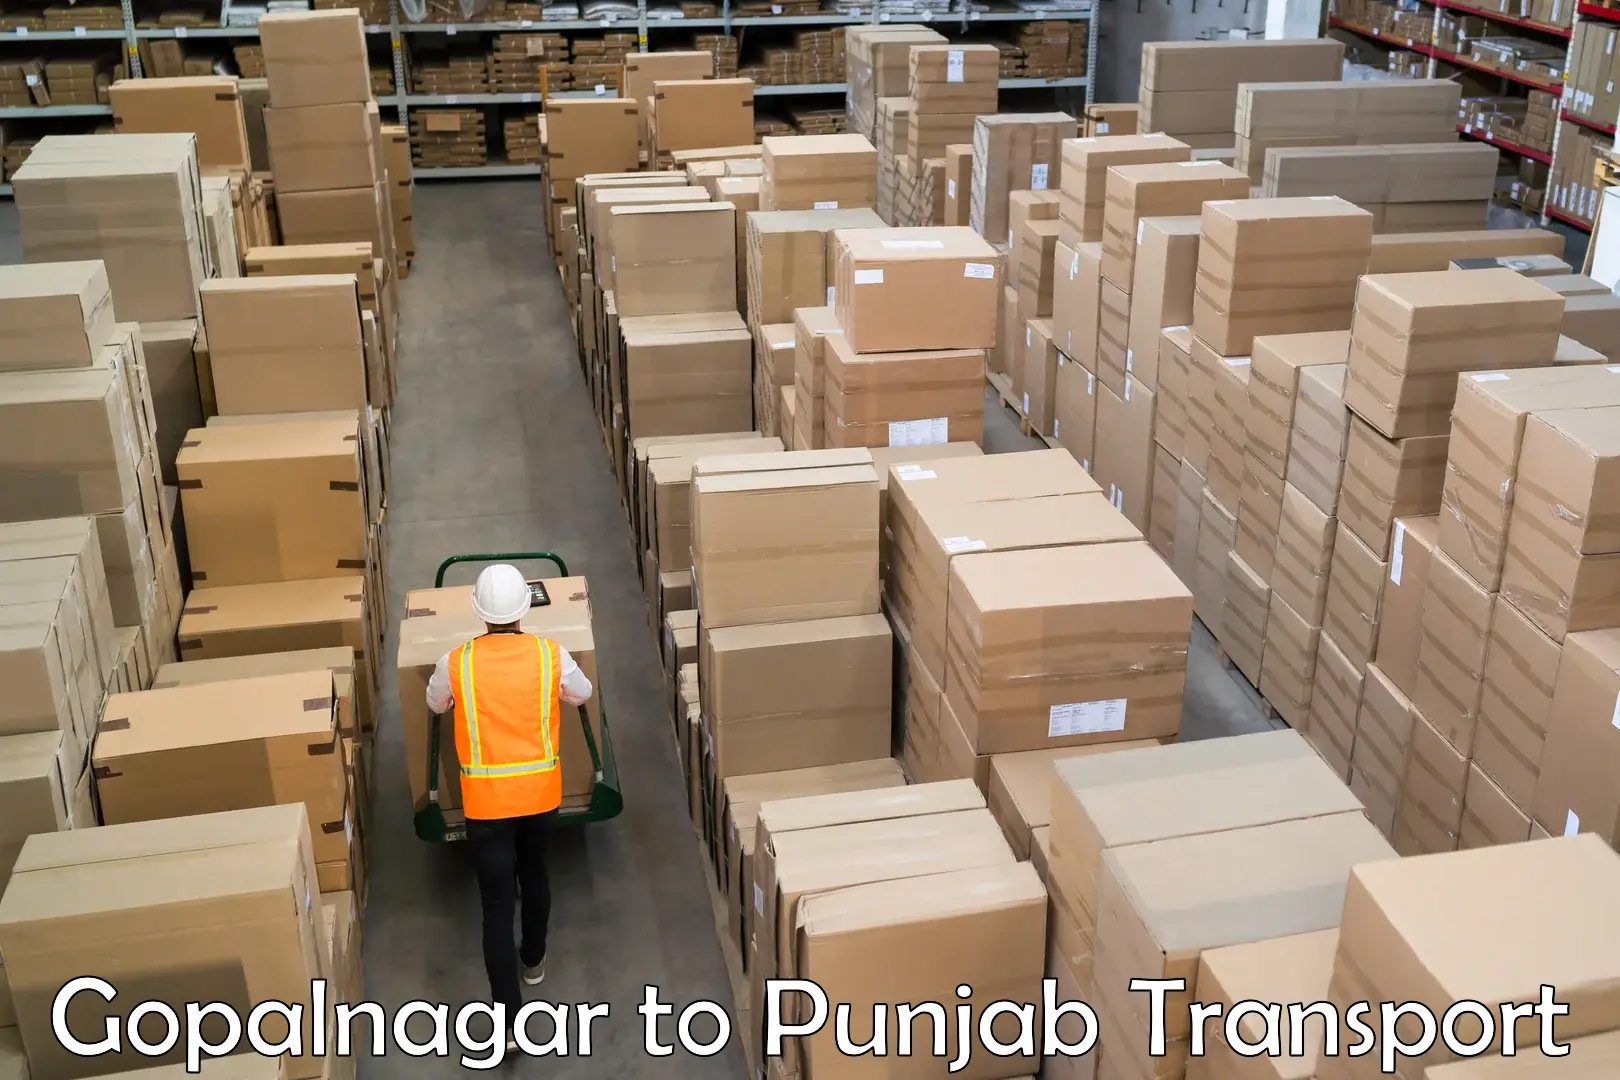 Container transport service Gopalnagar to Begowal